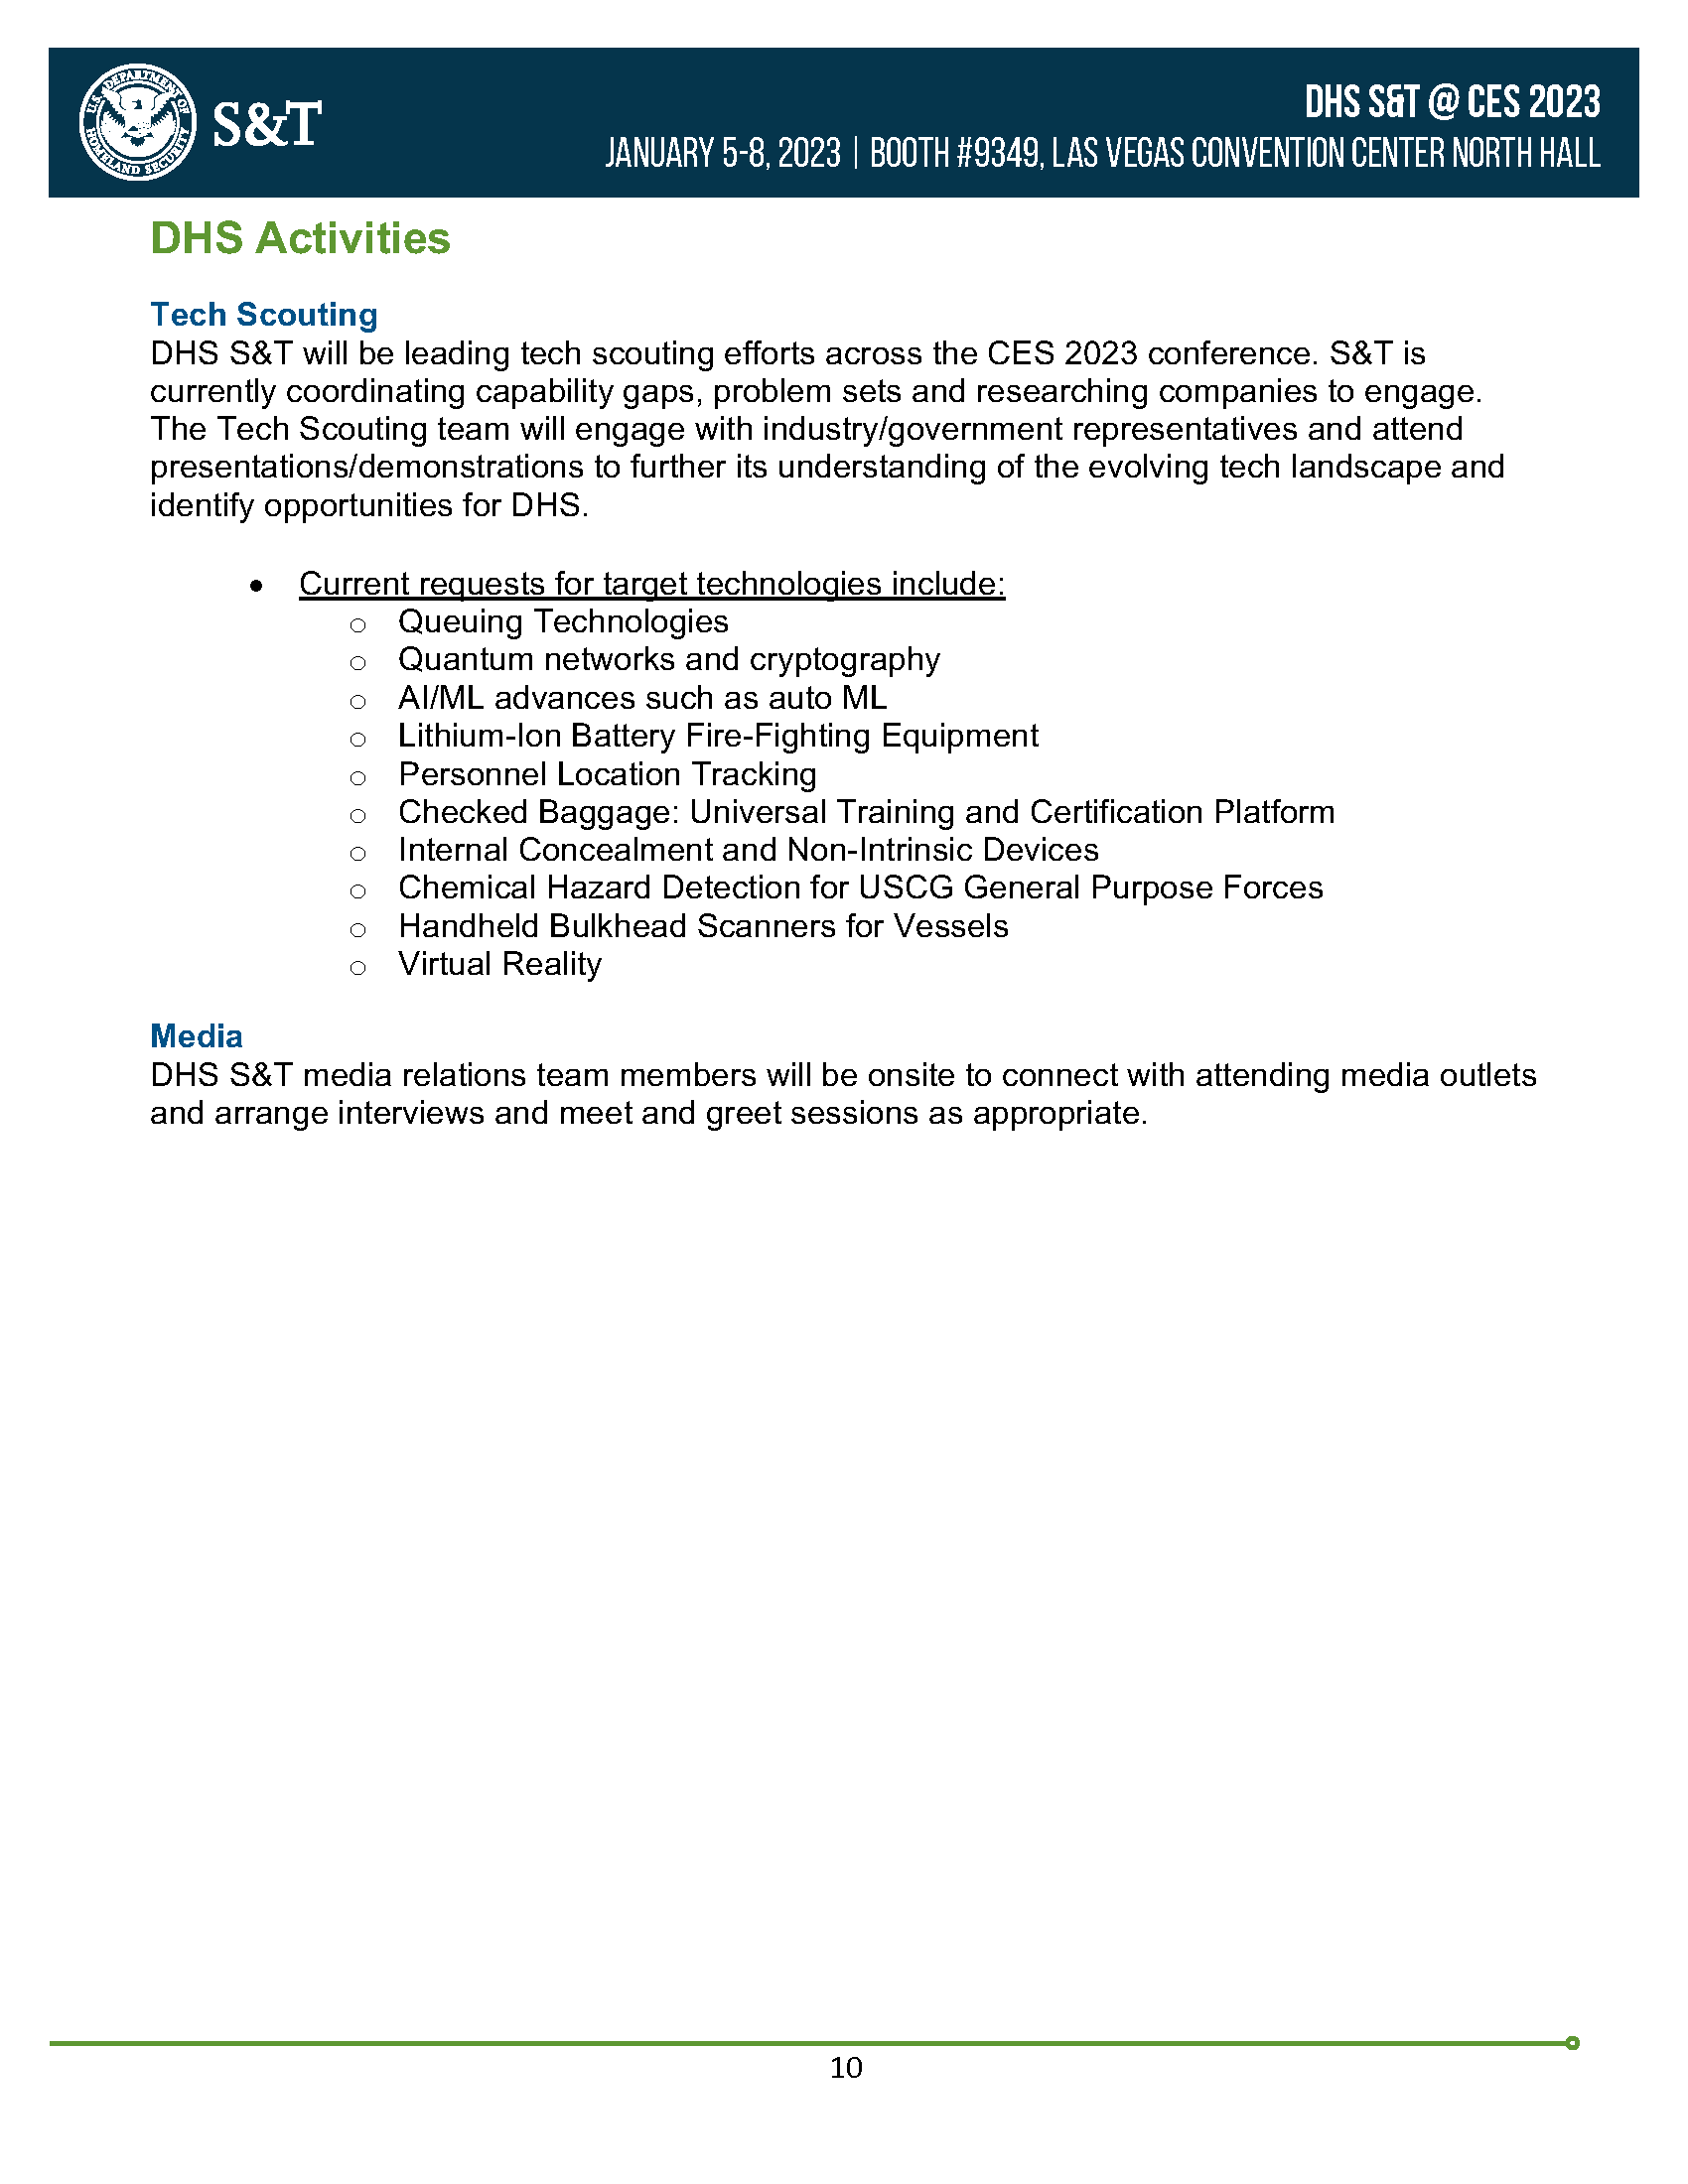 CES Readahead Document_Page_10.png